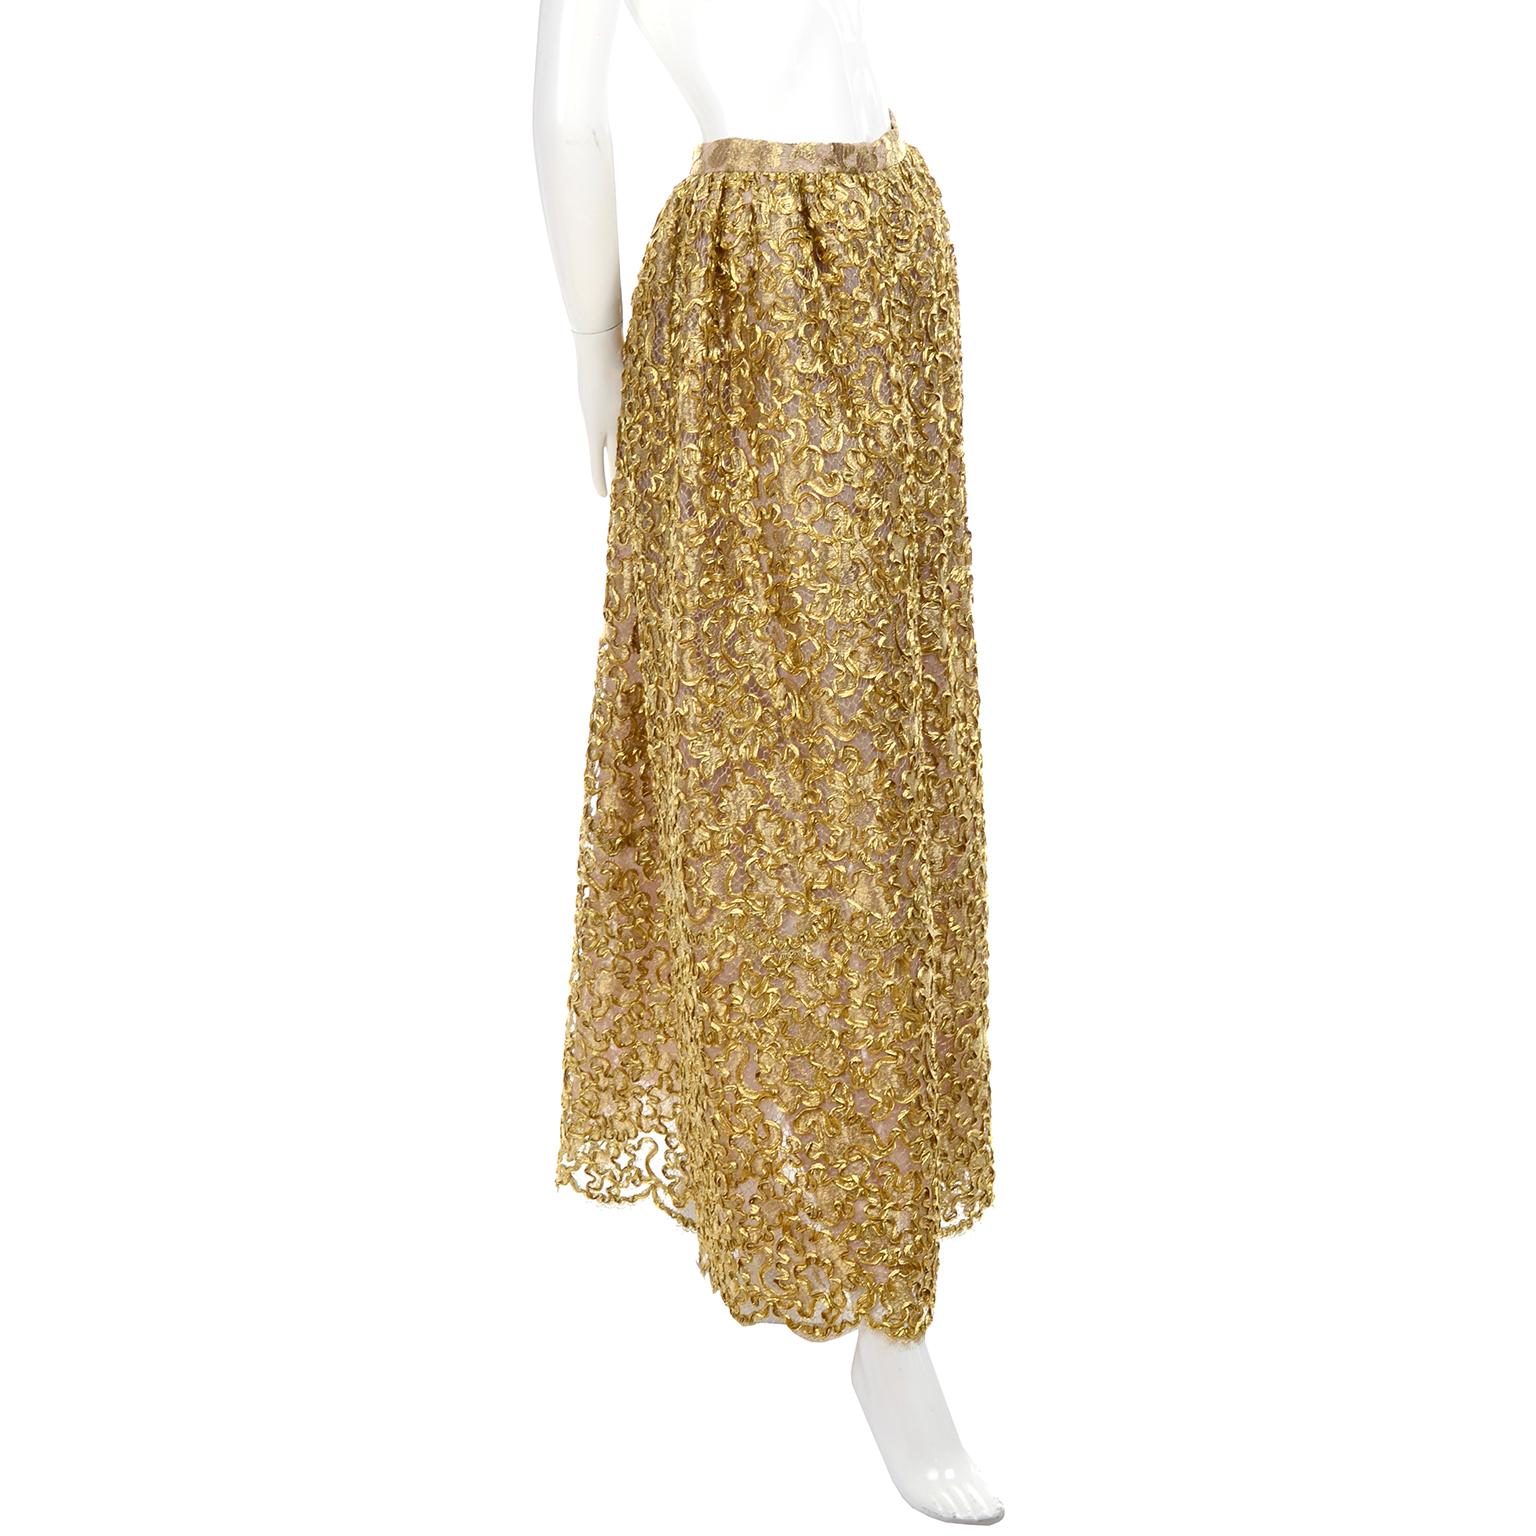 Mary McFadden Couture Evening Skirt in Gold Metallic Lace & Soutache New w/ Tags 1